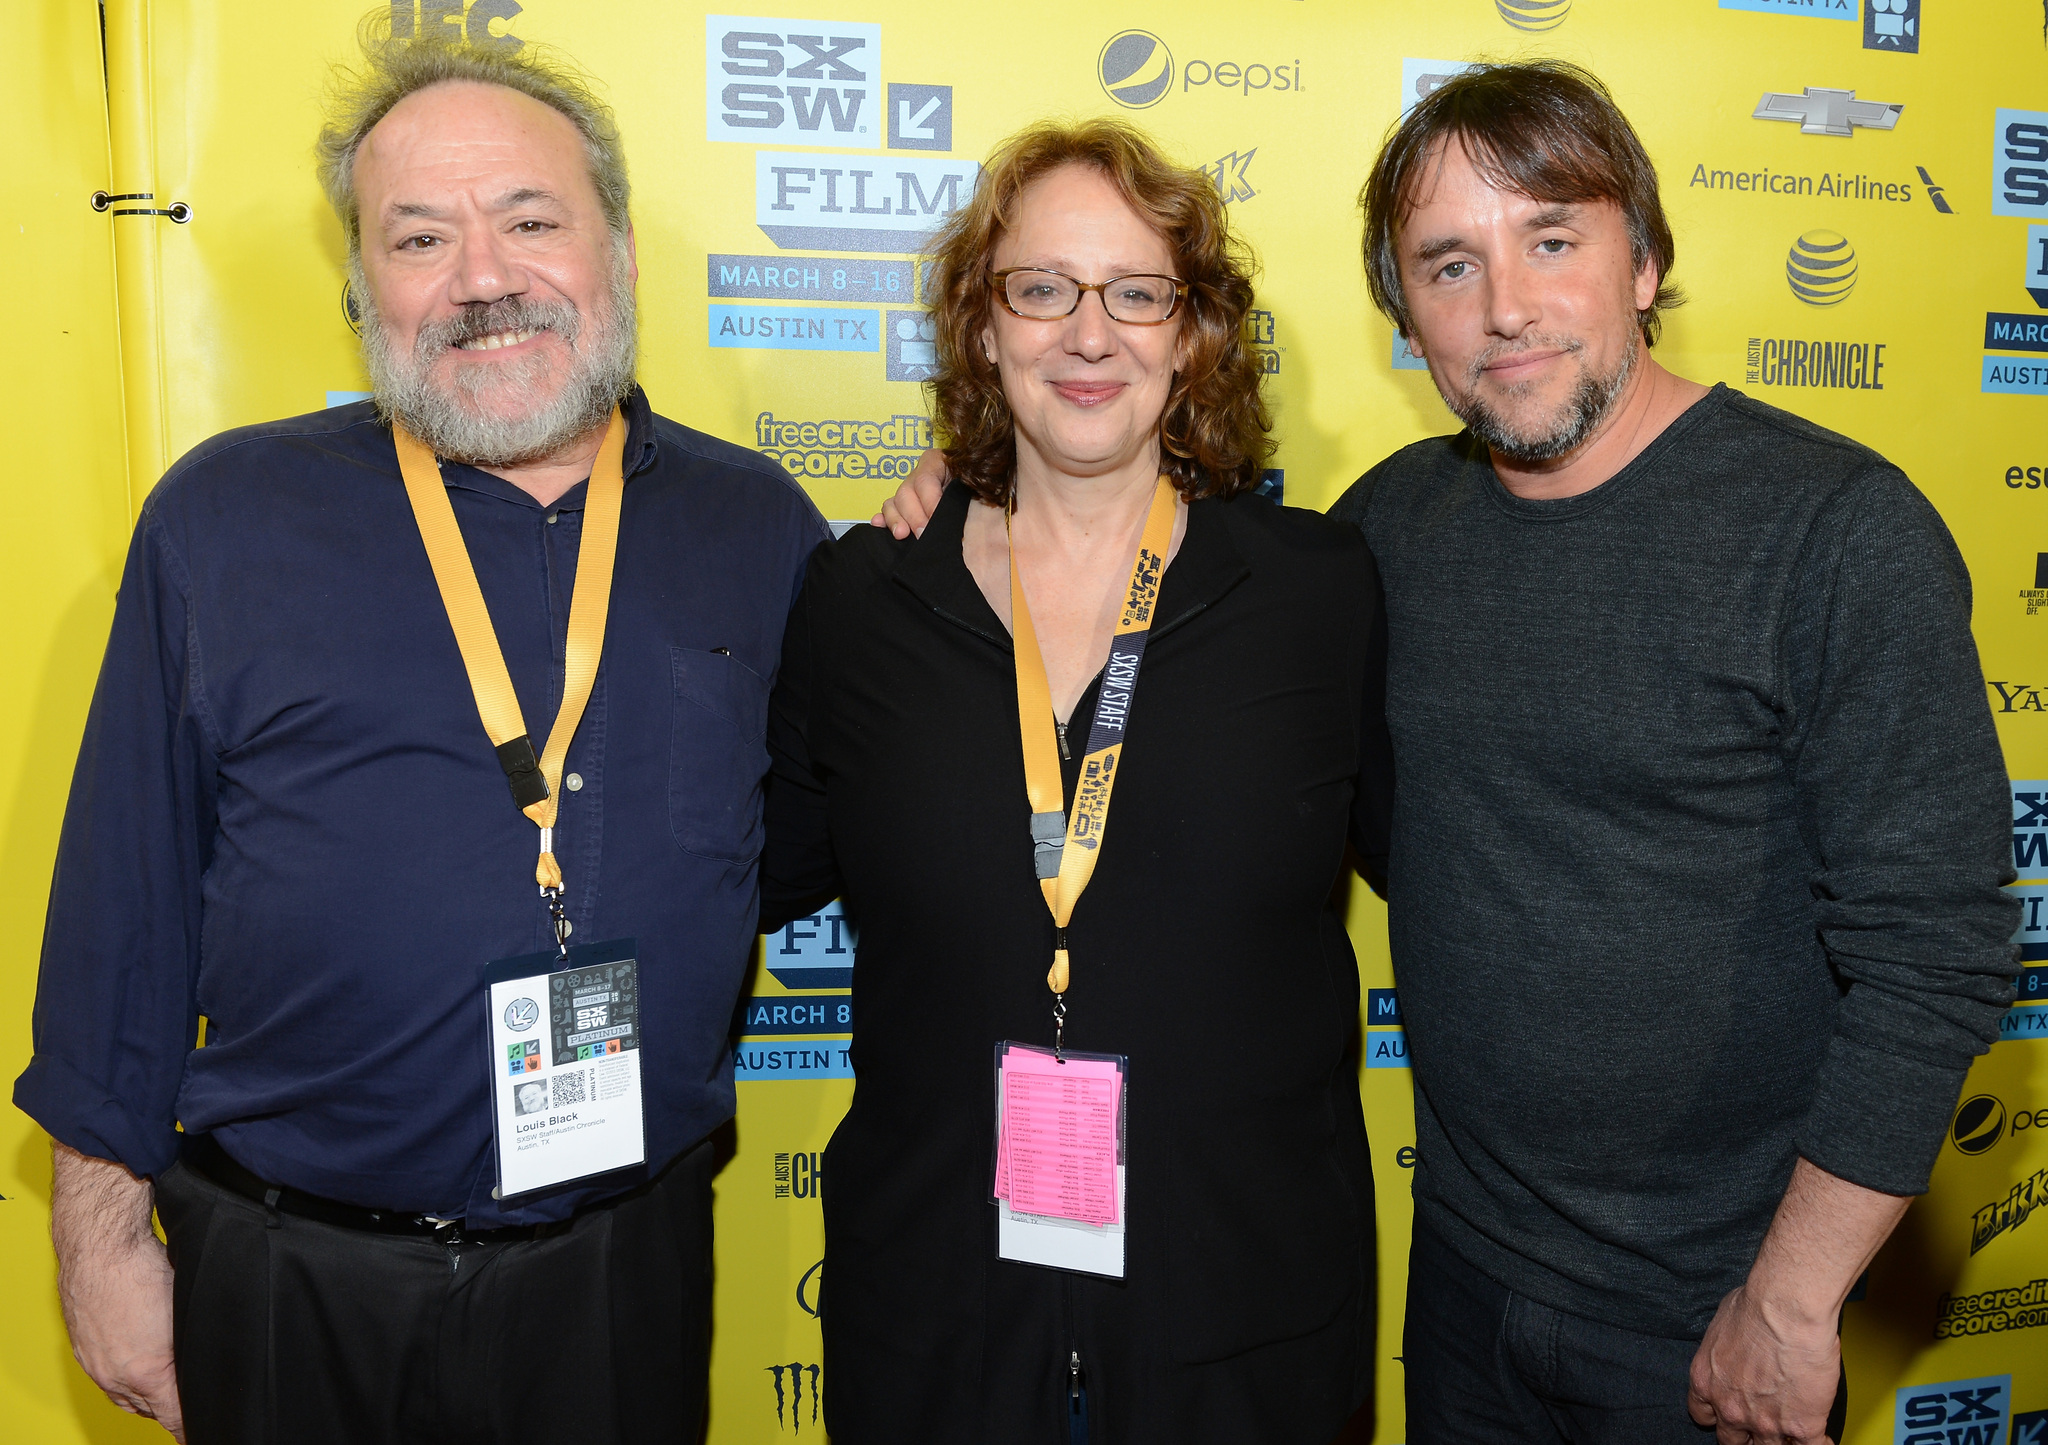 Richard Linklater, Louis Black and Janet Pierson at event of Pries vidurnakti (2013)